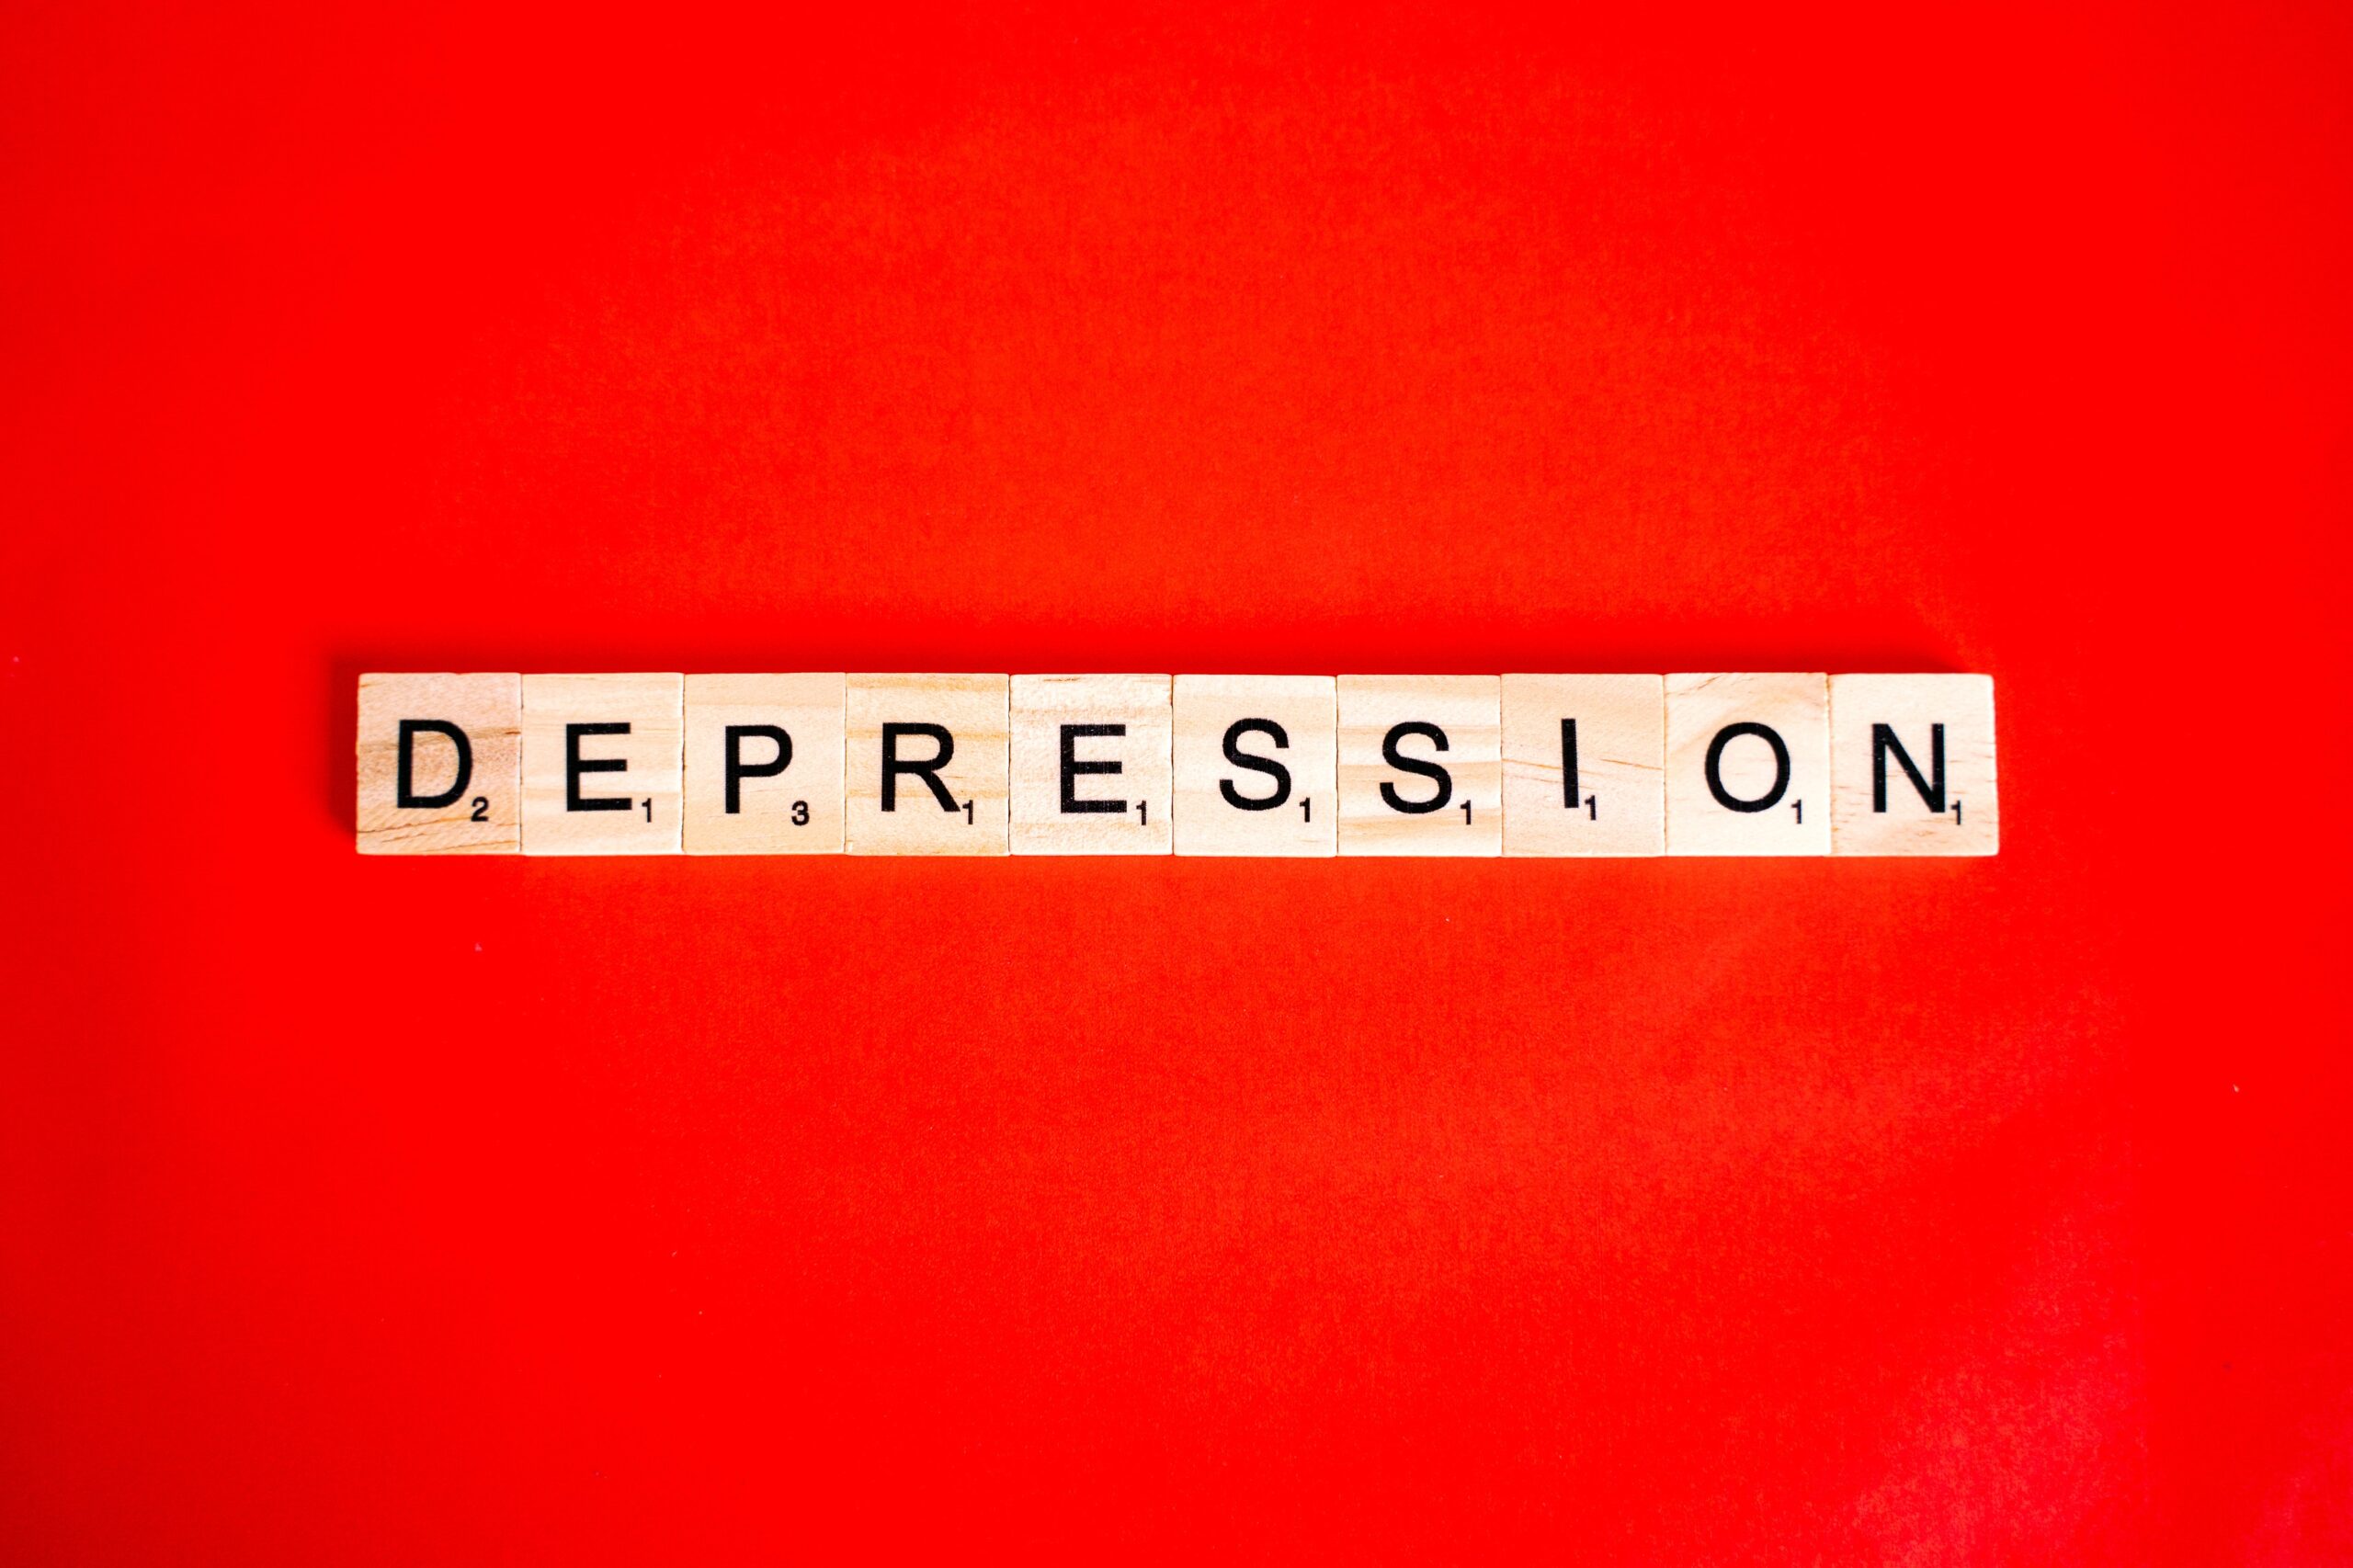 image of word depression using scrabble wooden letters